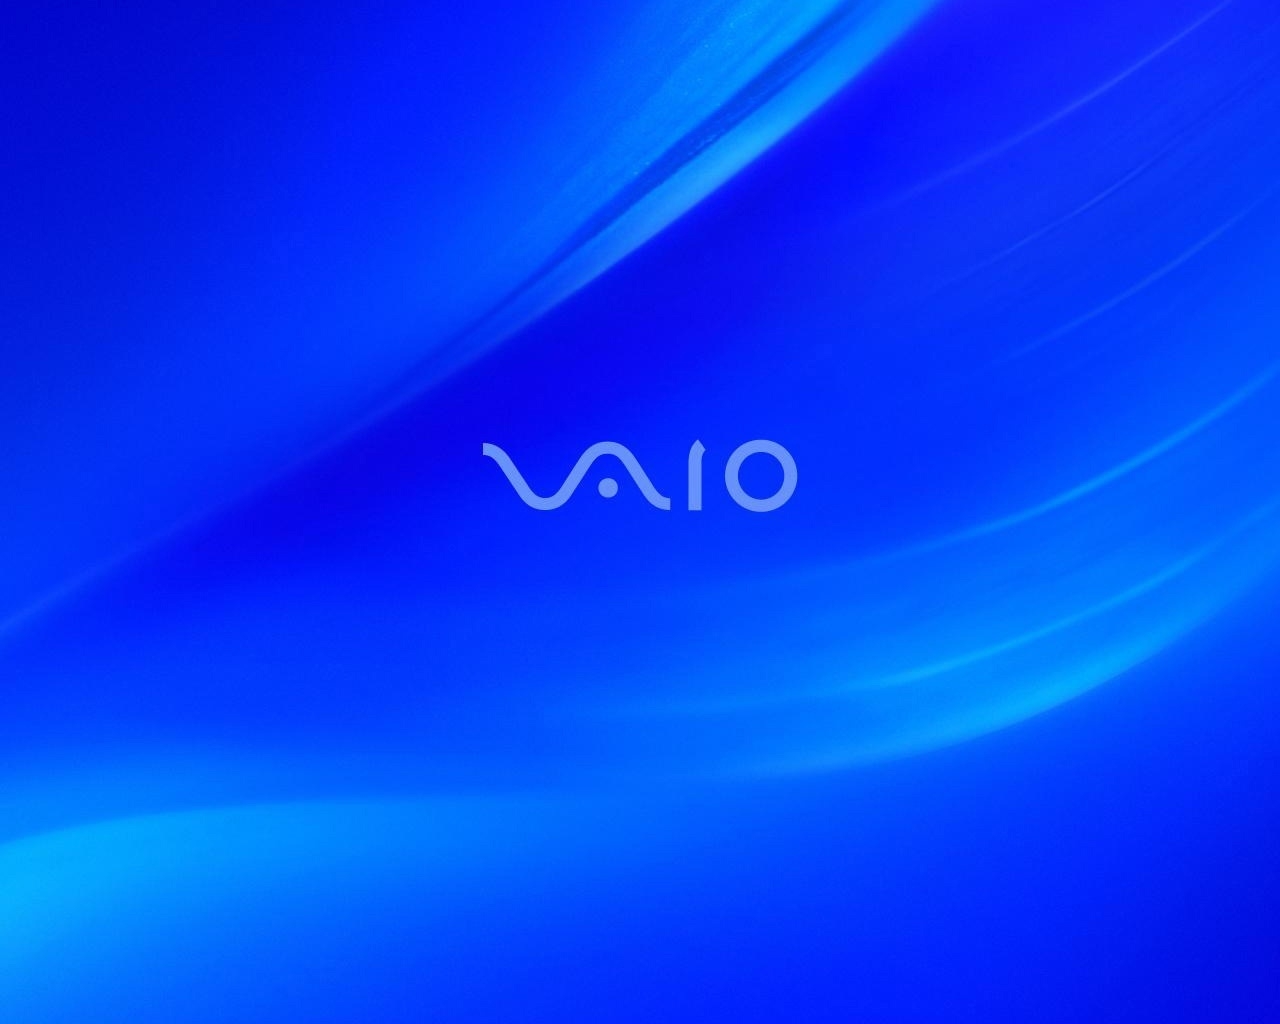 Sony Blue Vaio breeze for 1280 x 1024 resolution